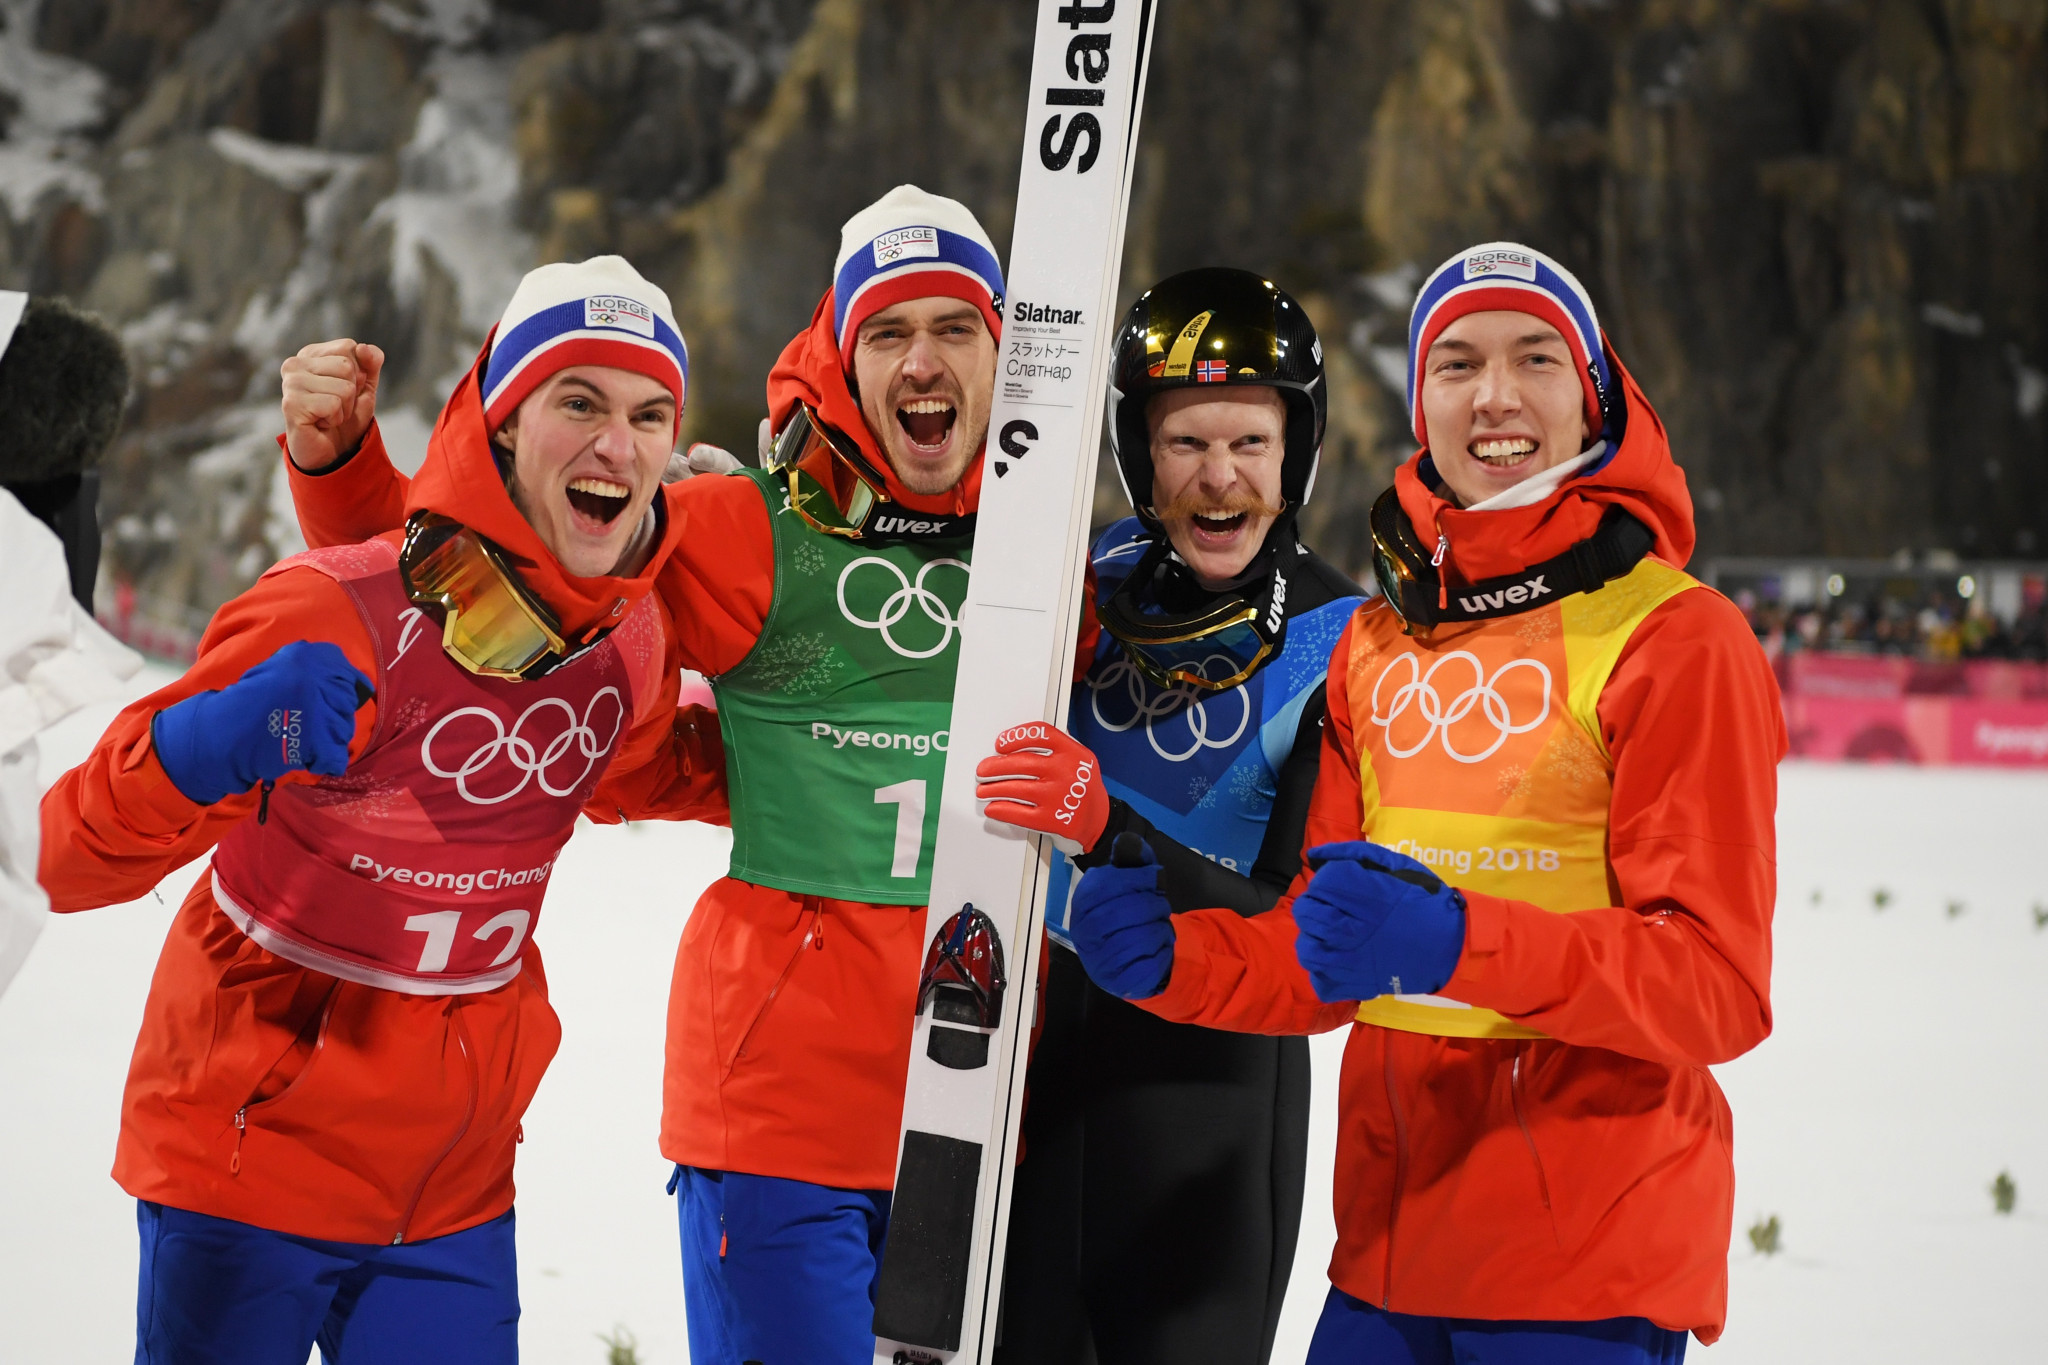 Norway win men's team event gold on last day of Pyeongchang 2018 ski jumping competition